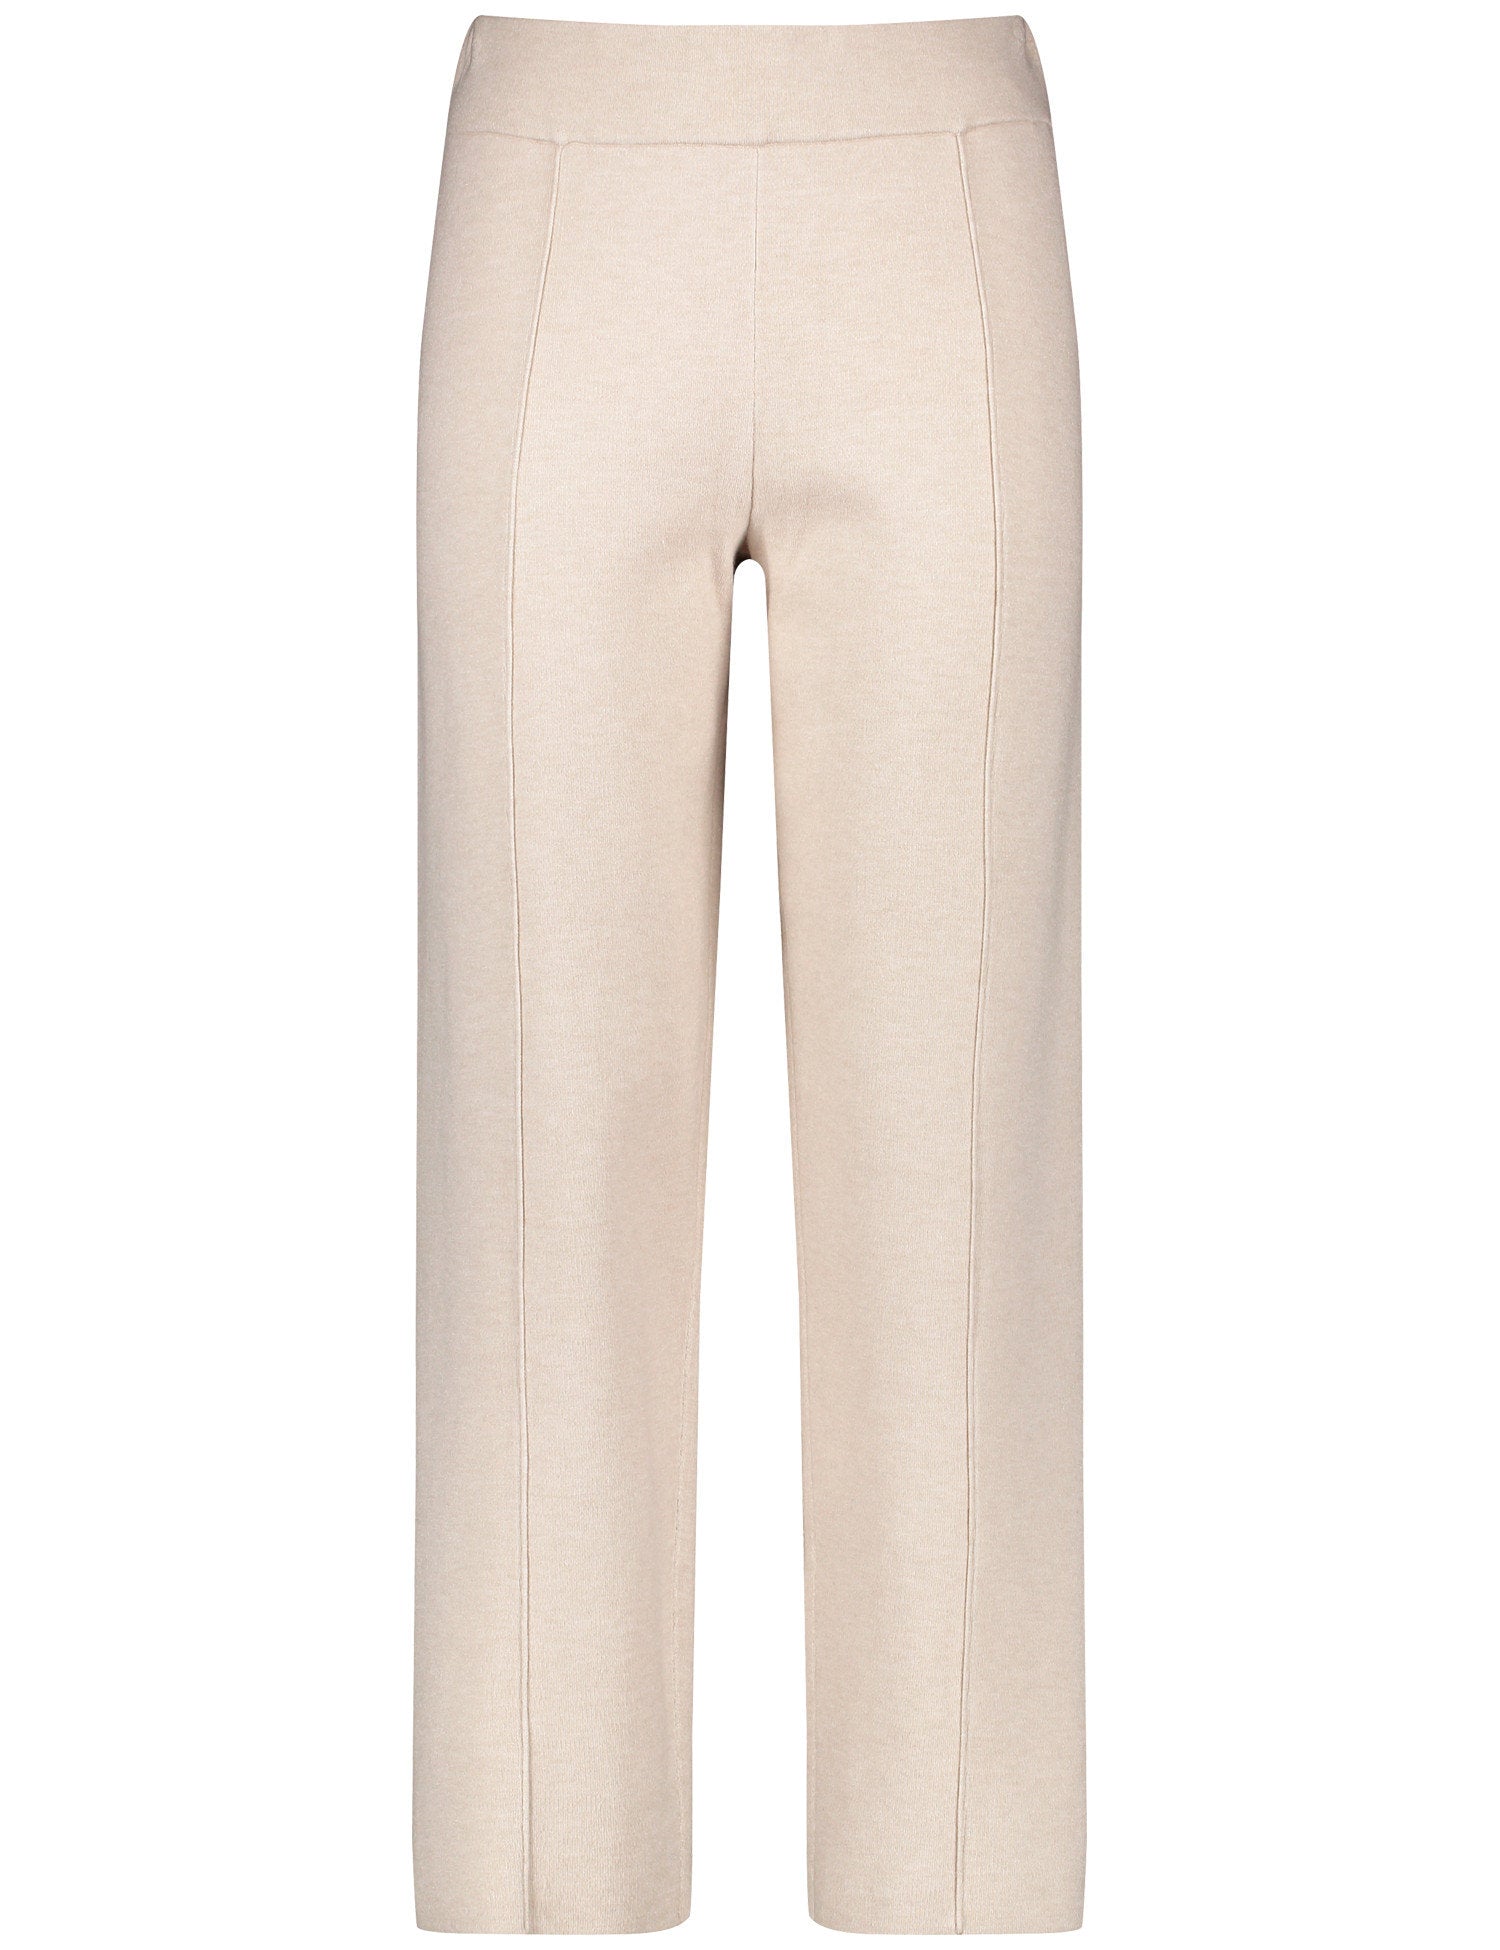 Beige Dress Trousers With Center Pleat_220032-35708_905440_01